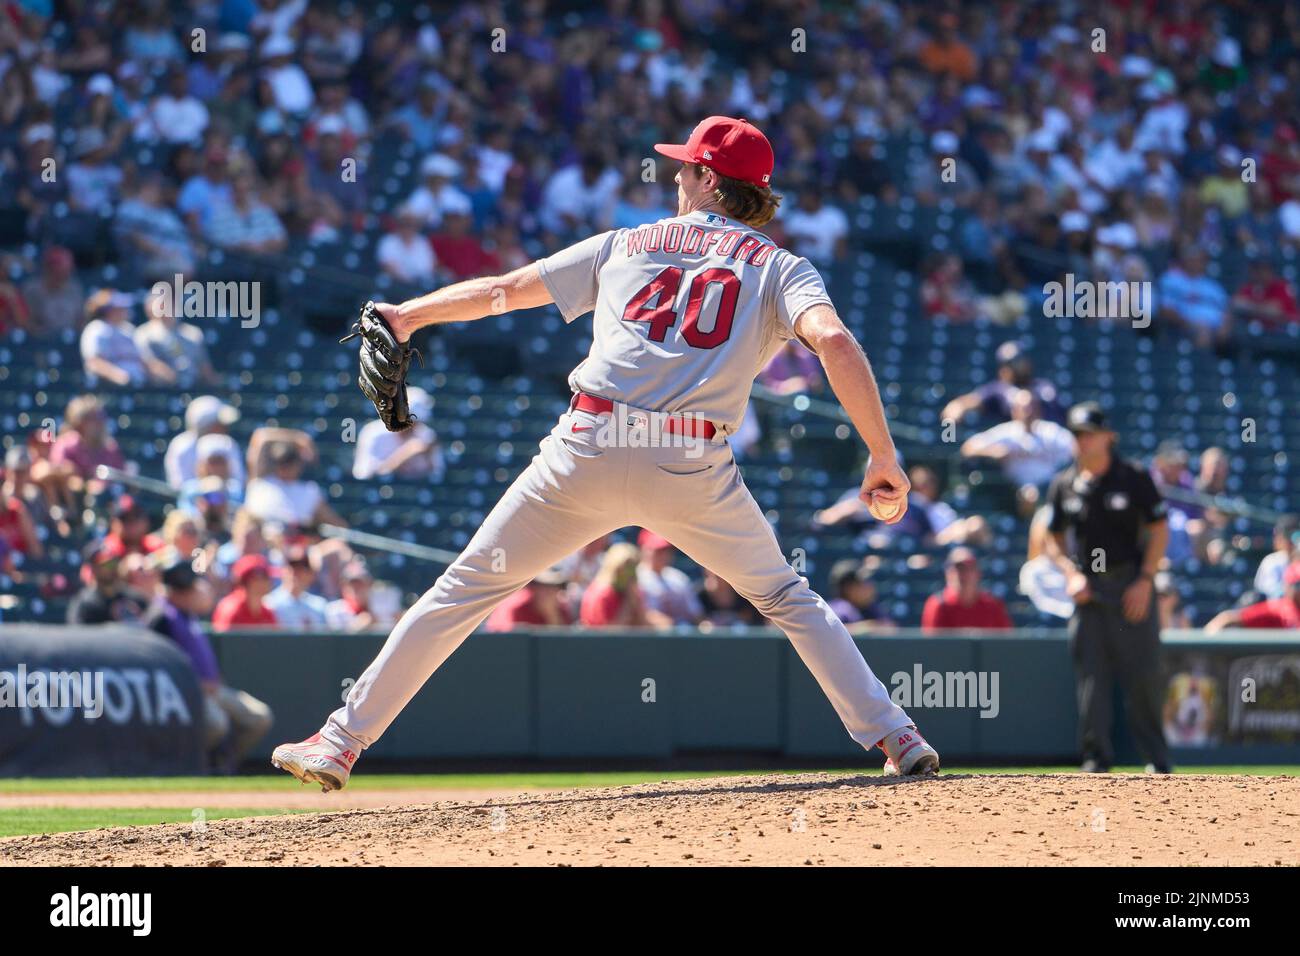 August 11 2022: Saint Louis pitcher Jake Woodford 40) throws a pitch during the game with Saint Louis Cardinals and Colorado Rockies held at Coors Field in Denver Co. David Seelig/Cal Sport Medi Credit: Cal Sport Media/Alamy Live News Stock Photo